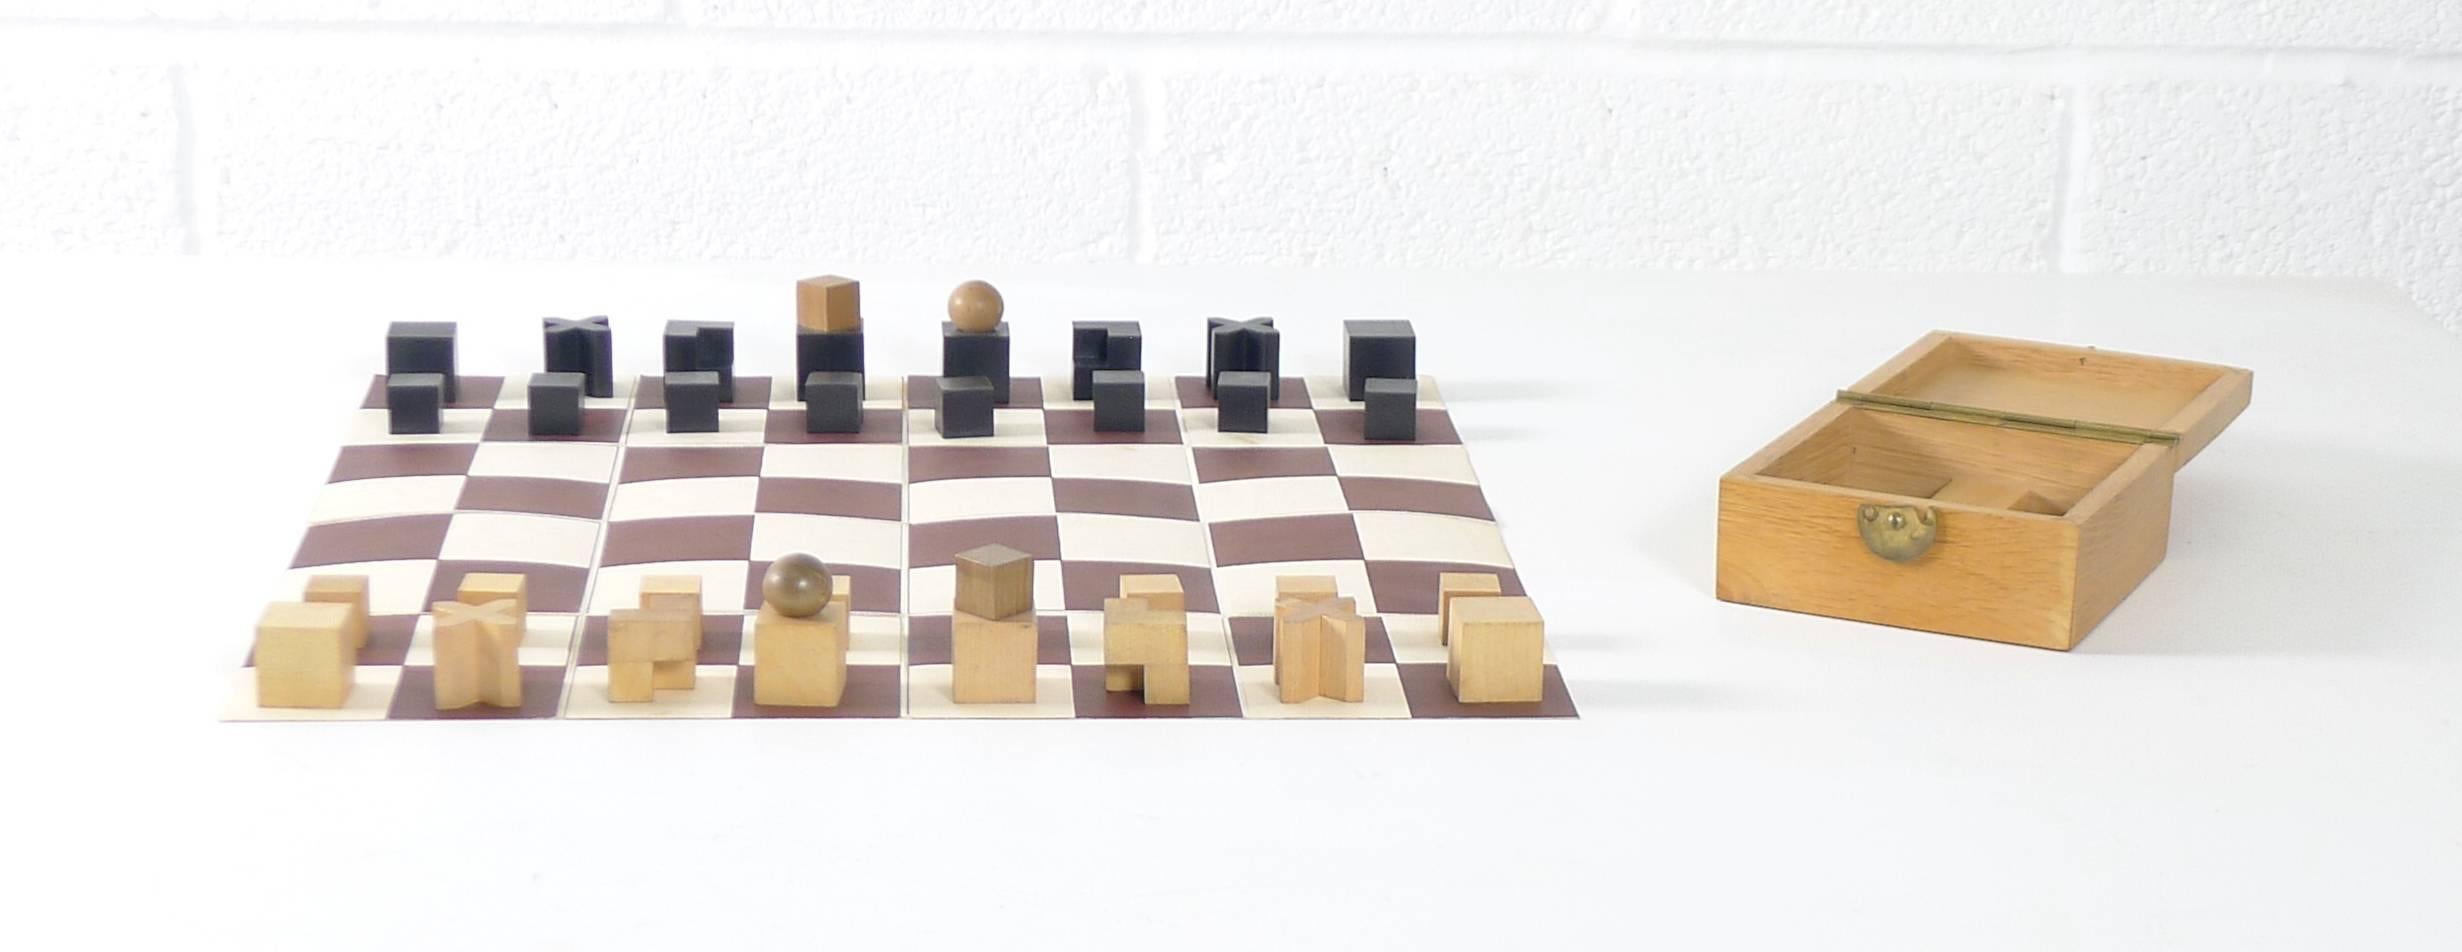 Josef Hartwig (1880-1956), Bauhaus chess set designed in 1923 and in production for approx. 7 years. Hartwig was head of the stone and wood sculpture workshop at the Weimar Bauhaus from 1921-1925, this Chess set embodies the schools tenet of 